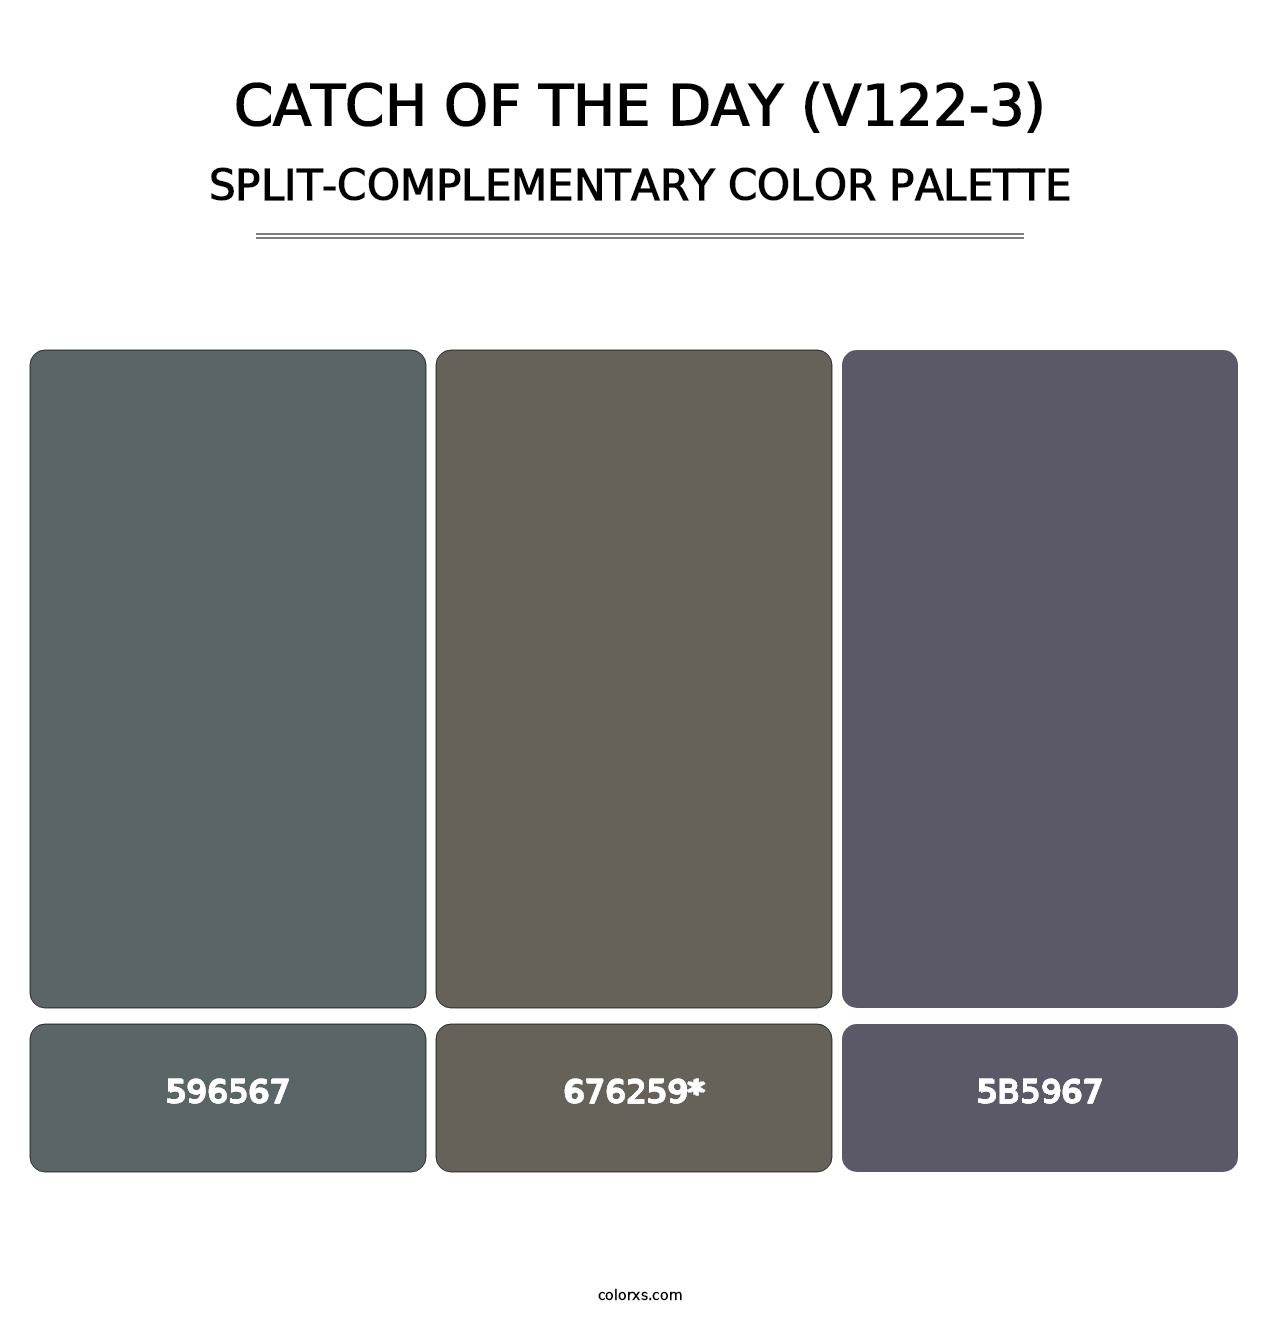 Catch of the Day (V122-3) - Split-Complementary Color Palette